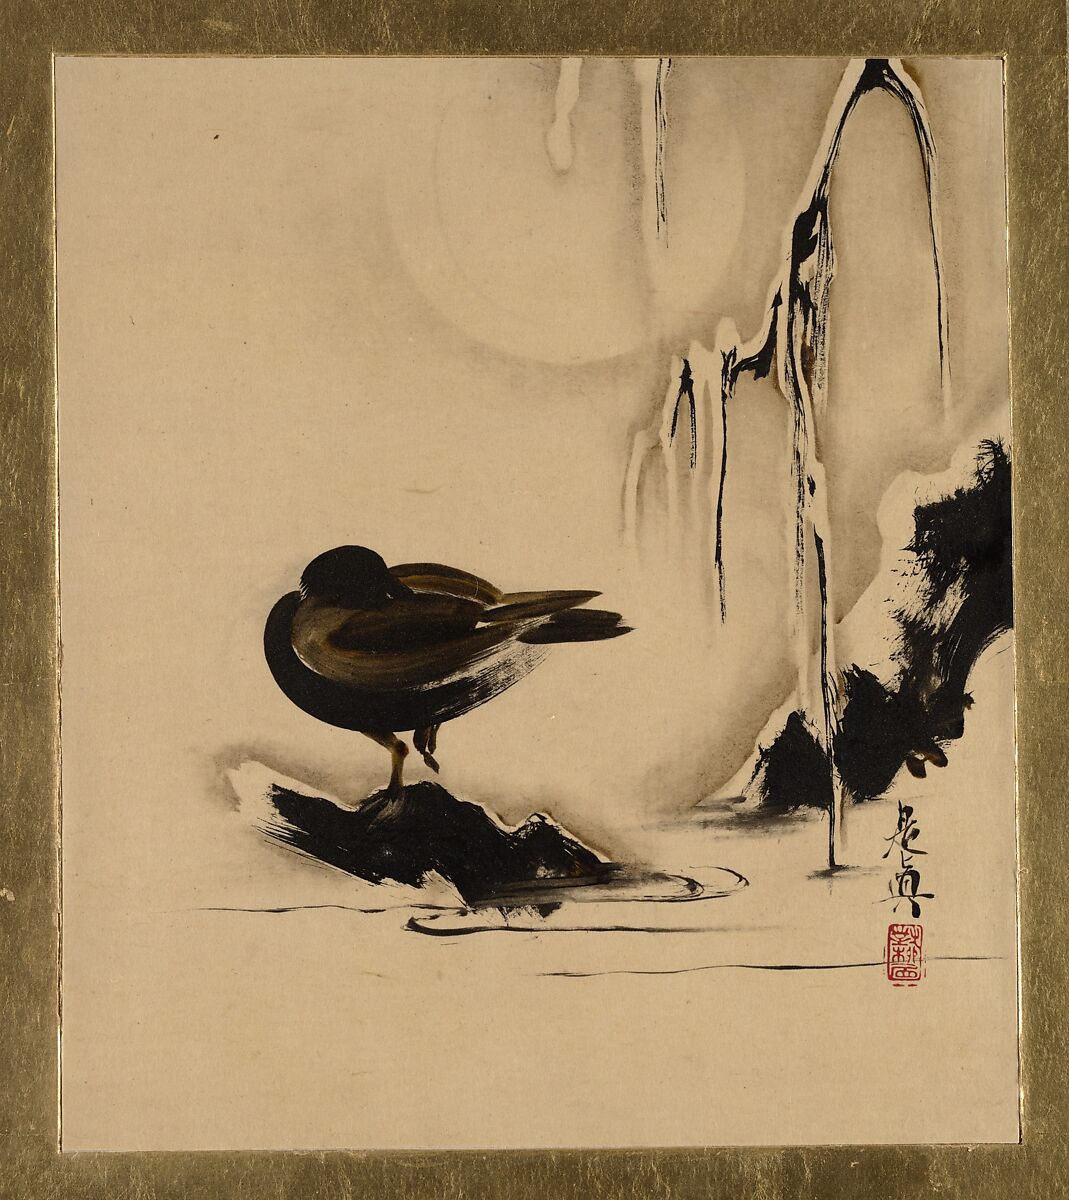 Lacquer Paintings of Various Subjects: Bird and Willow in Snow, Shibata Zeshin (Japanese, 1807–1891), Album leaf; ink, color, and lacquer on paper, Japan 